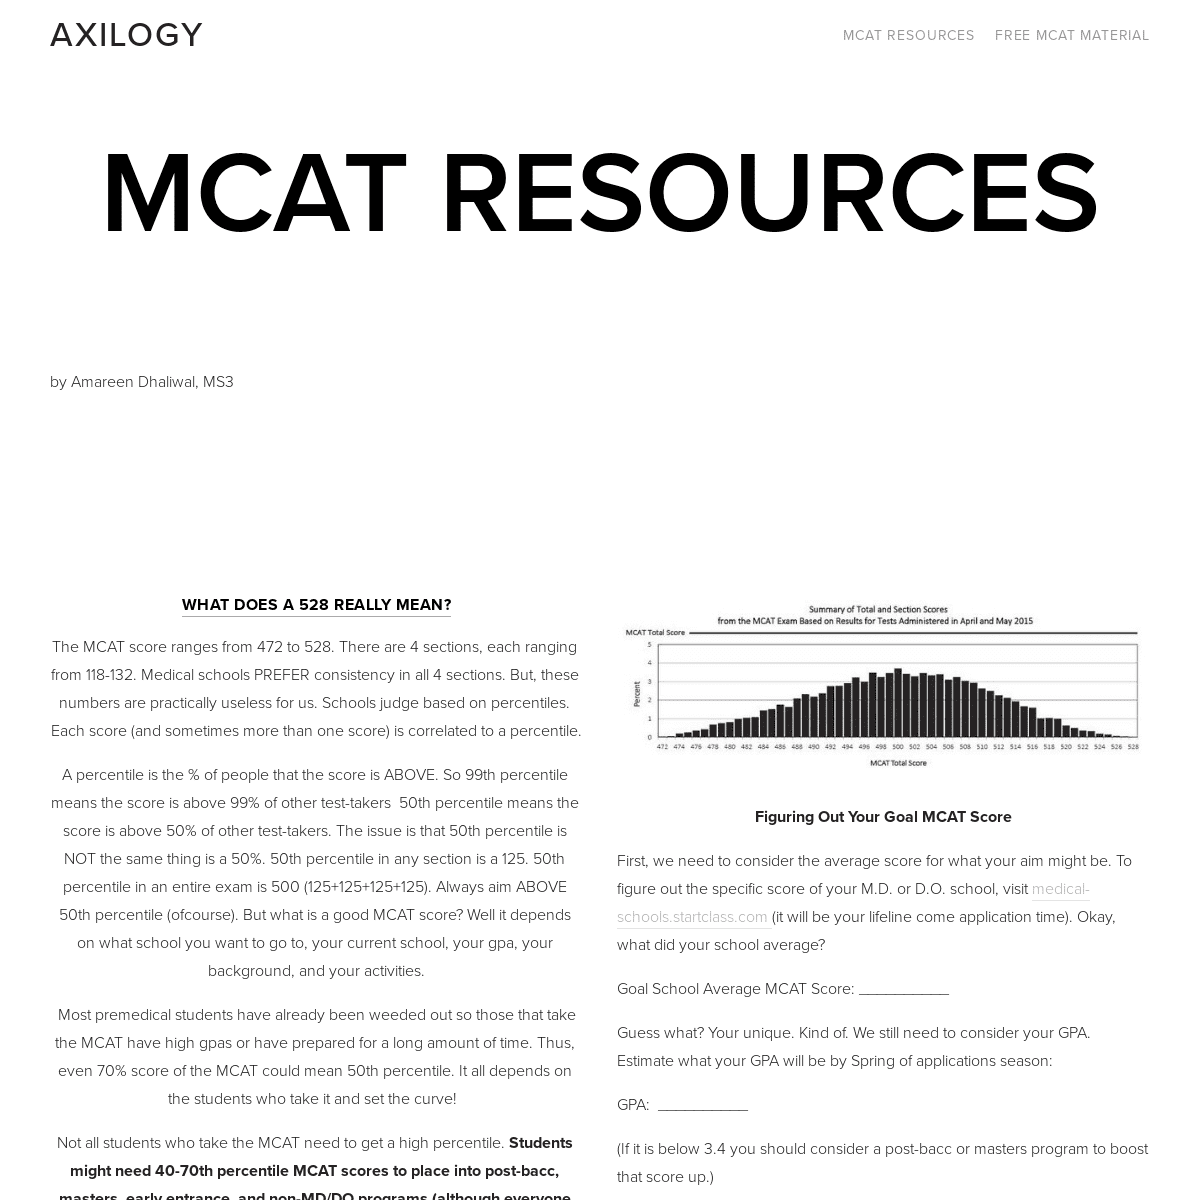 A complete backup of dailymcat.com